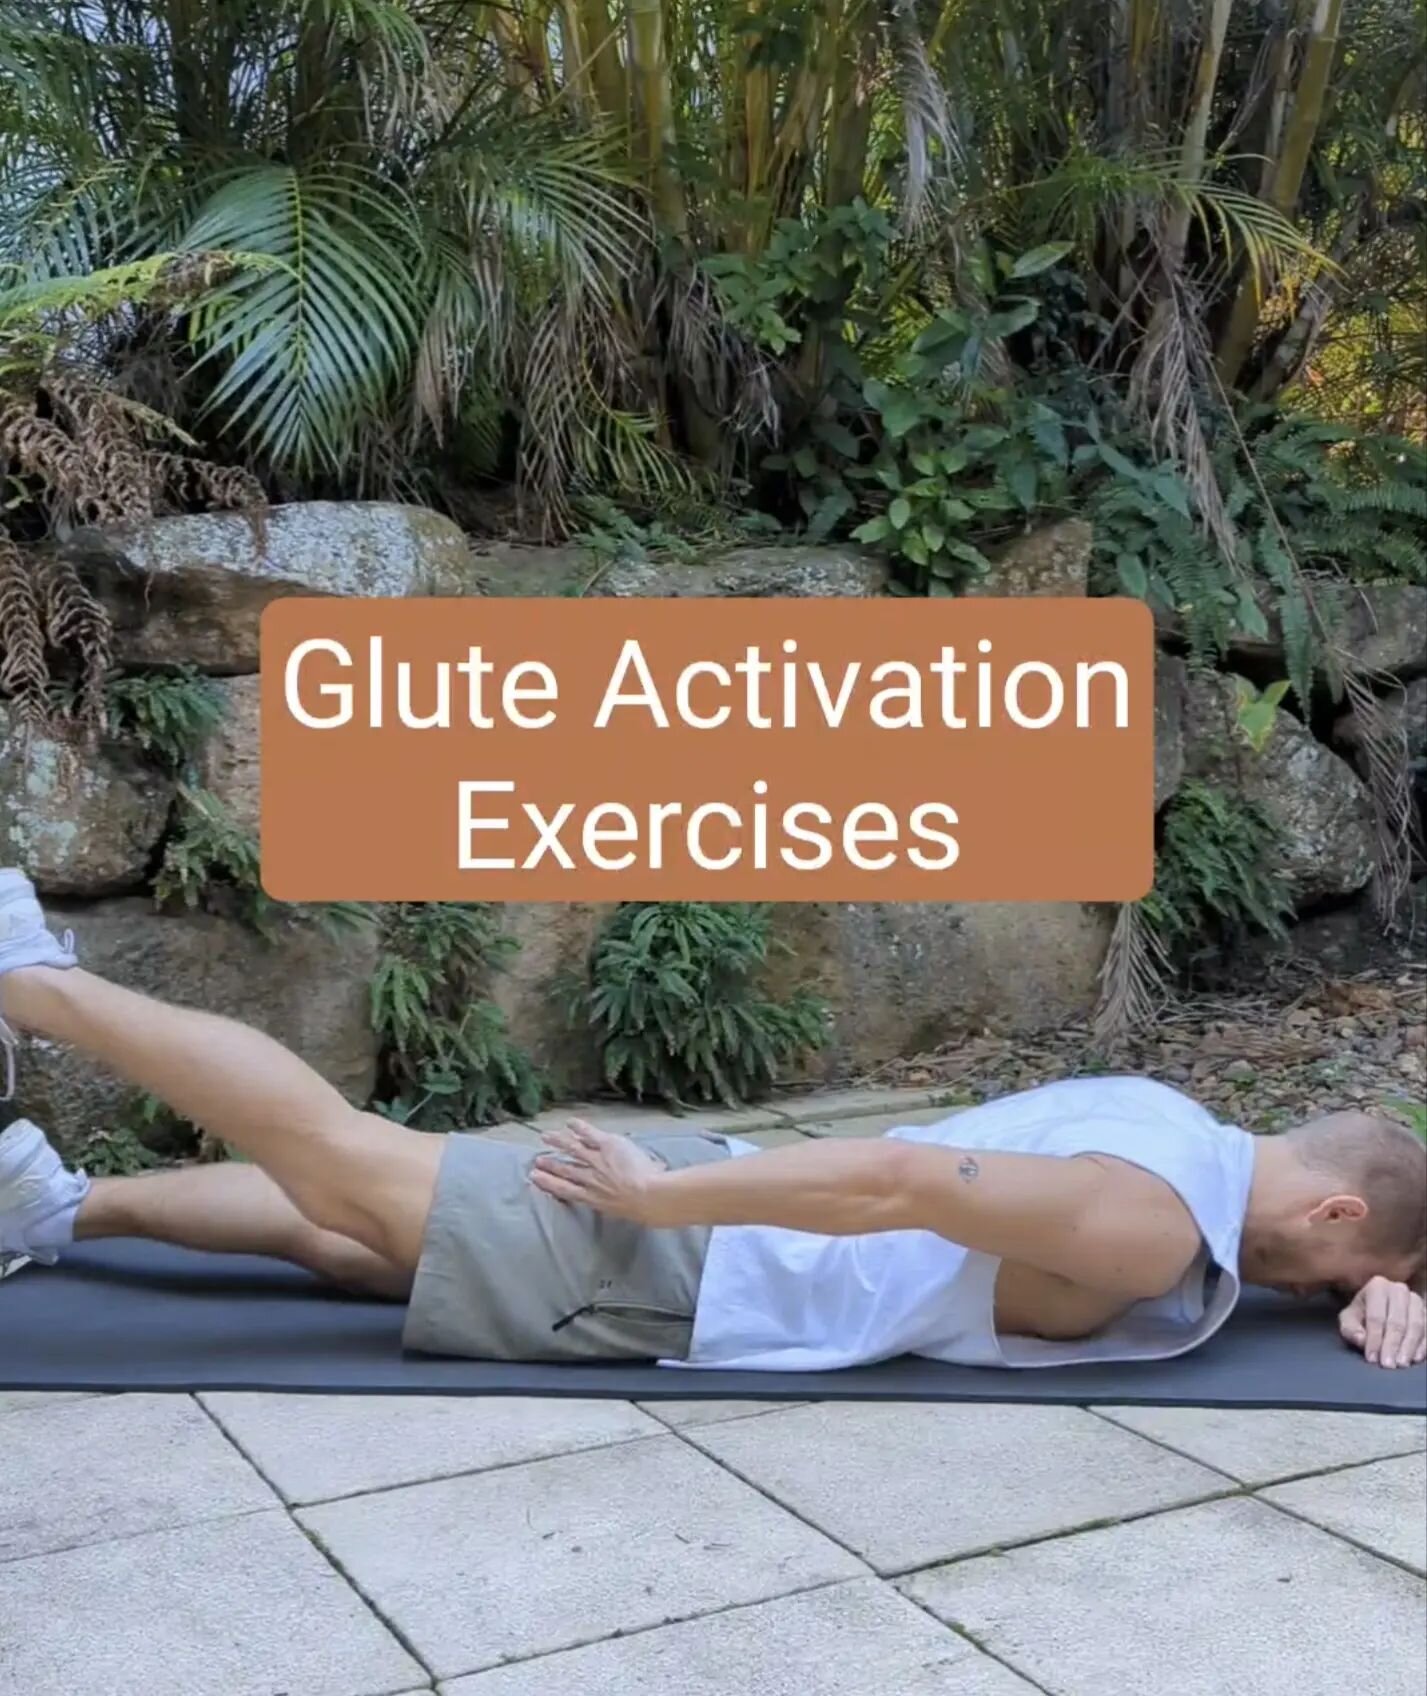 🍑 Glute Activation Exercises 🍑

You can literally throw the kitchen sink 🛁 at your glutes with a whole bunch of fancy exercises 💪, but until you alleviate any potential muscle inhibition, and improve your brain-body connection 🧠, you could poten